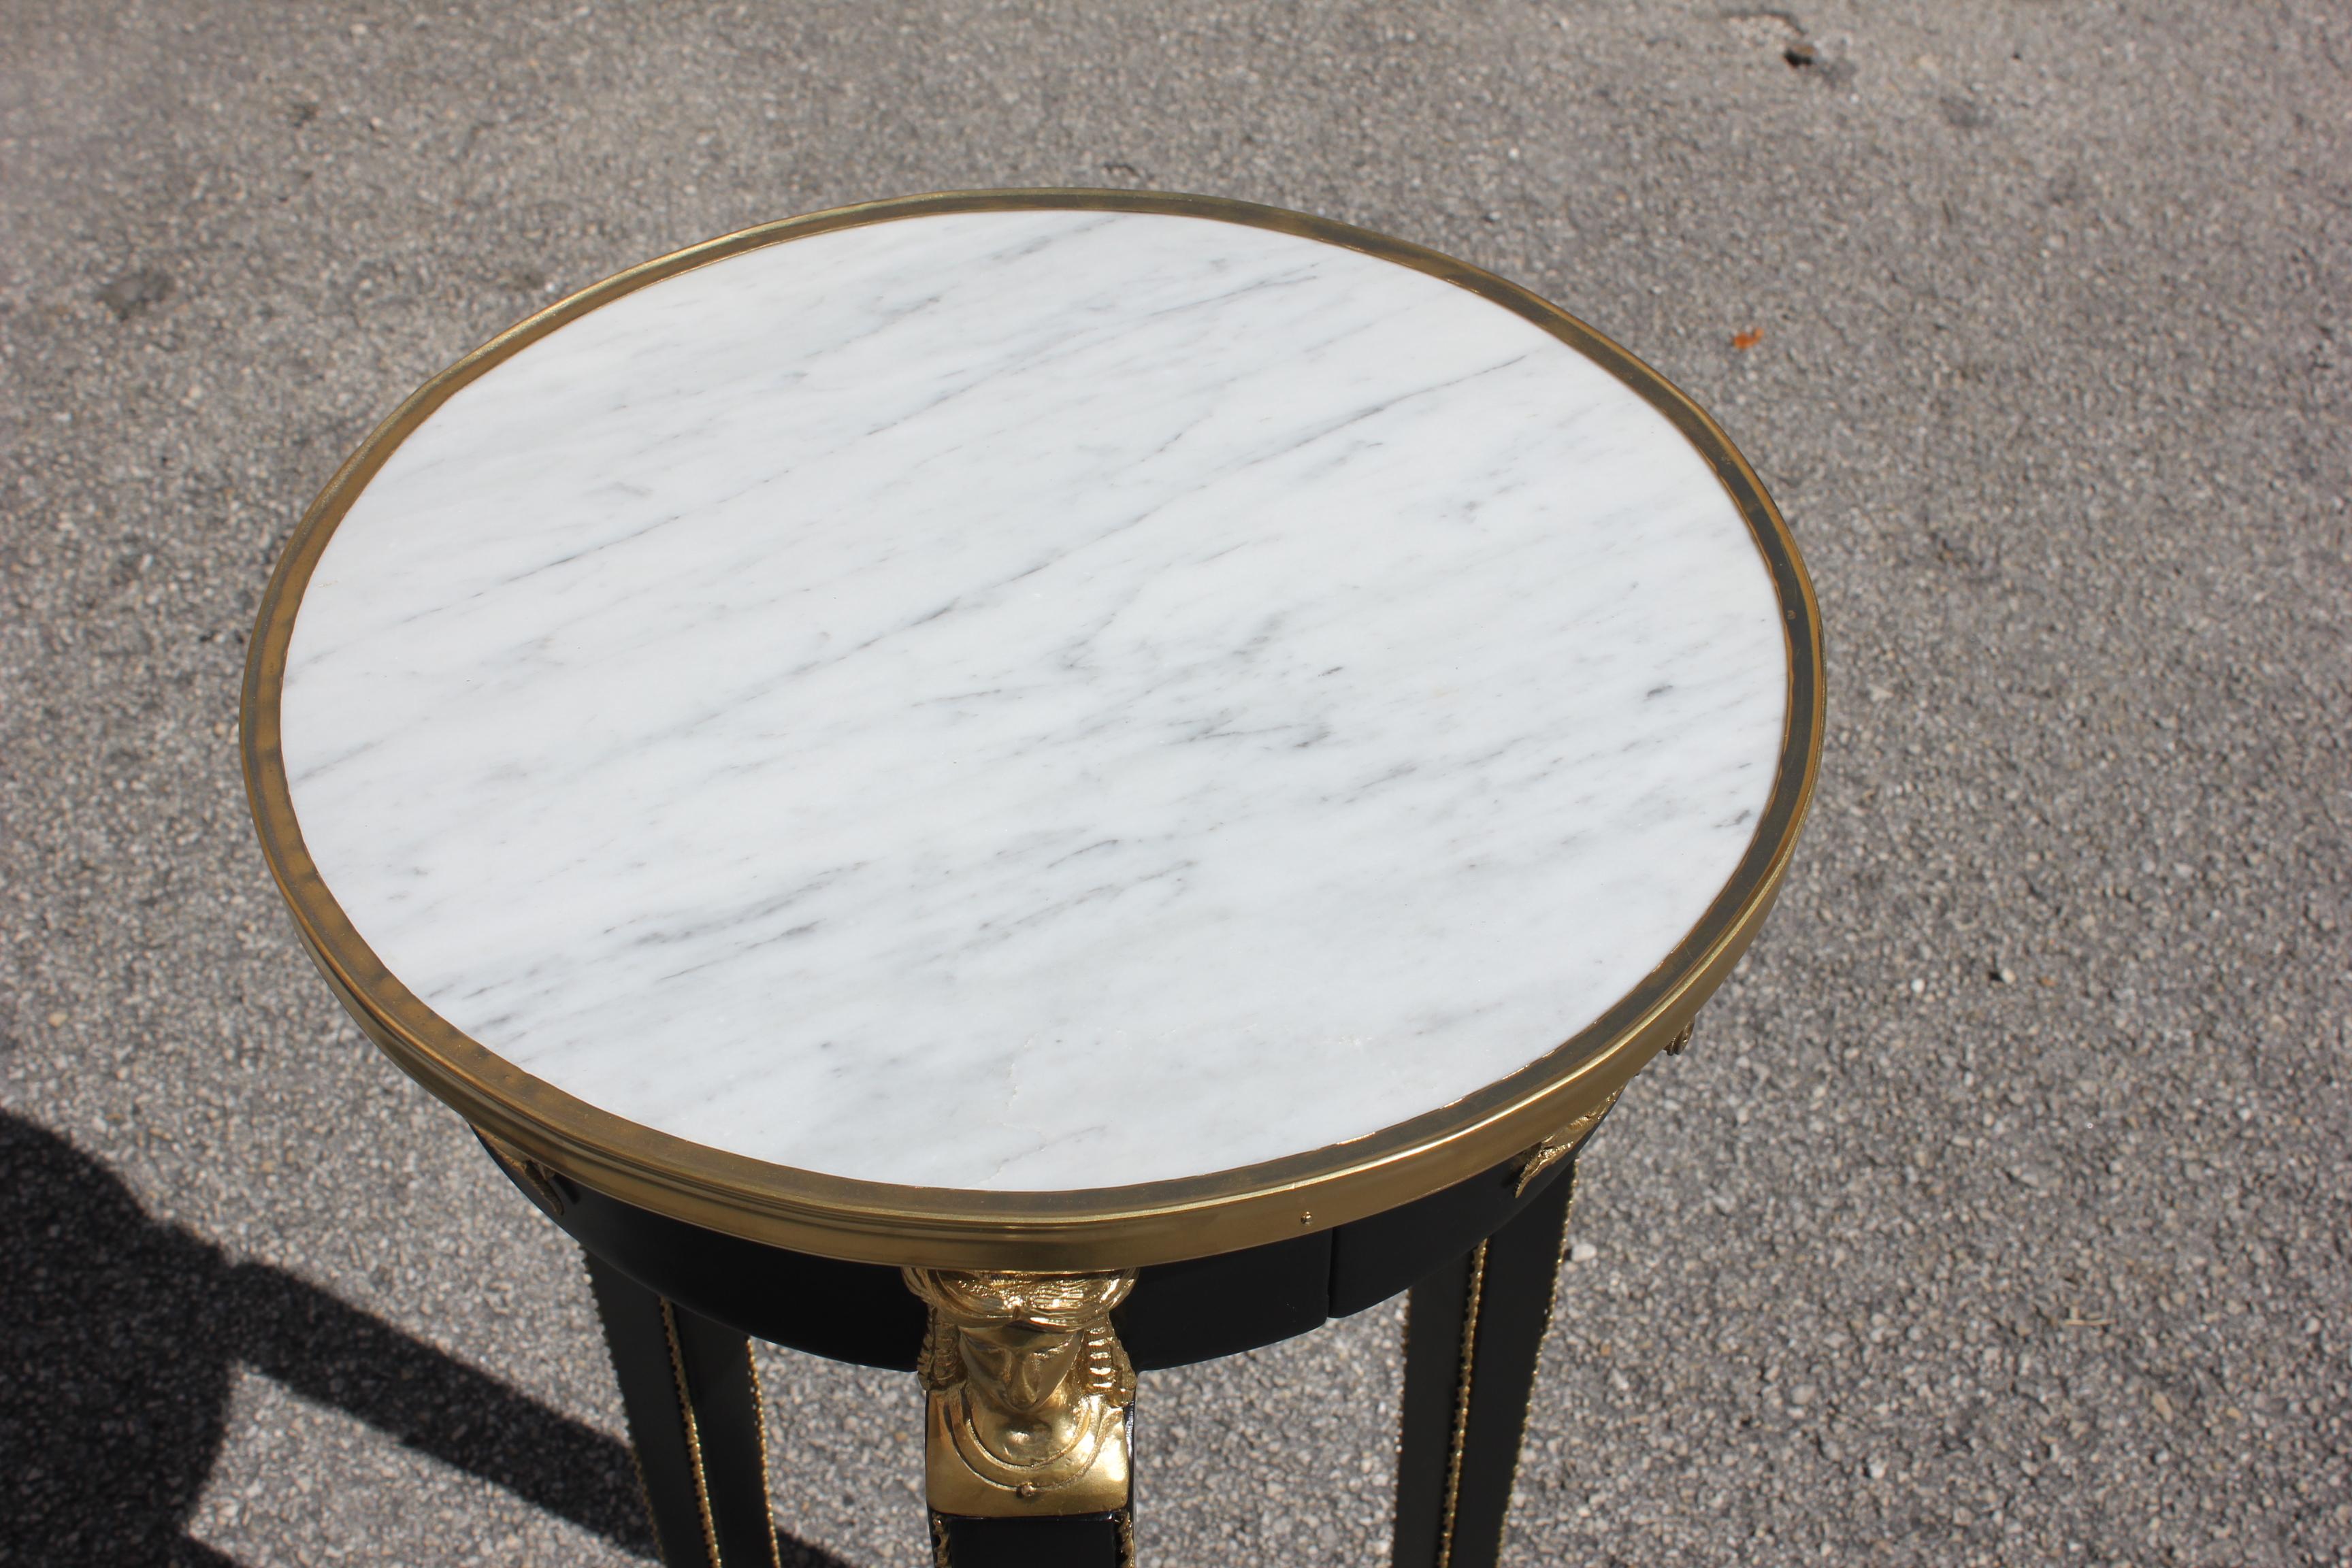 Beautiful French Empire Style Tall Side Table or Pedestal Table Marble Table (Französisch)